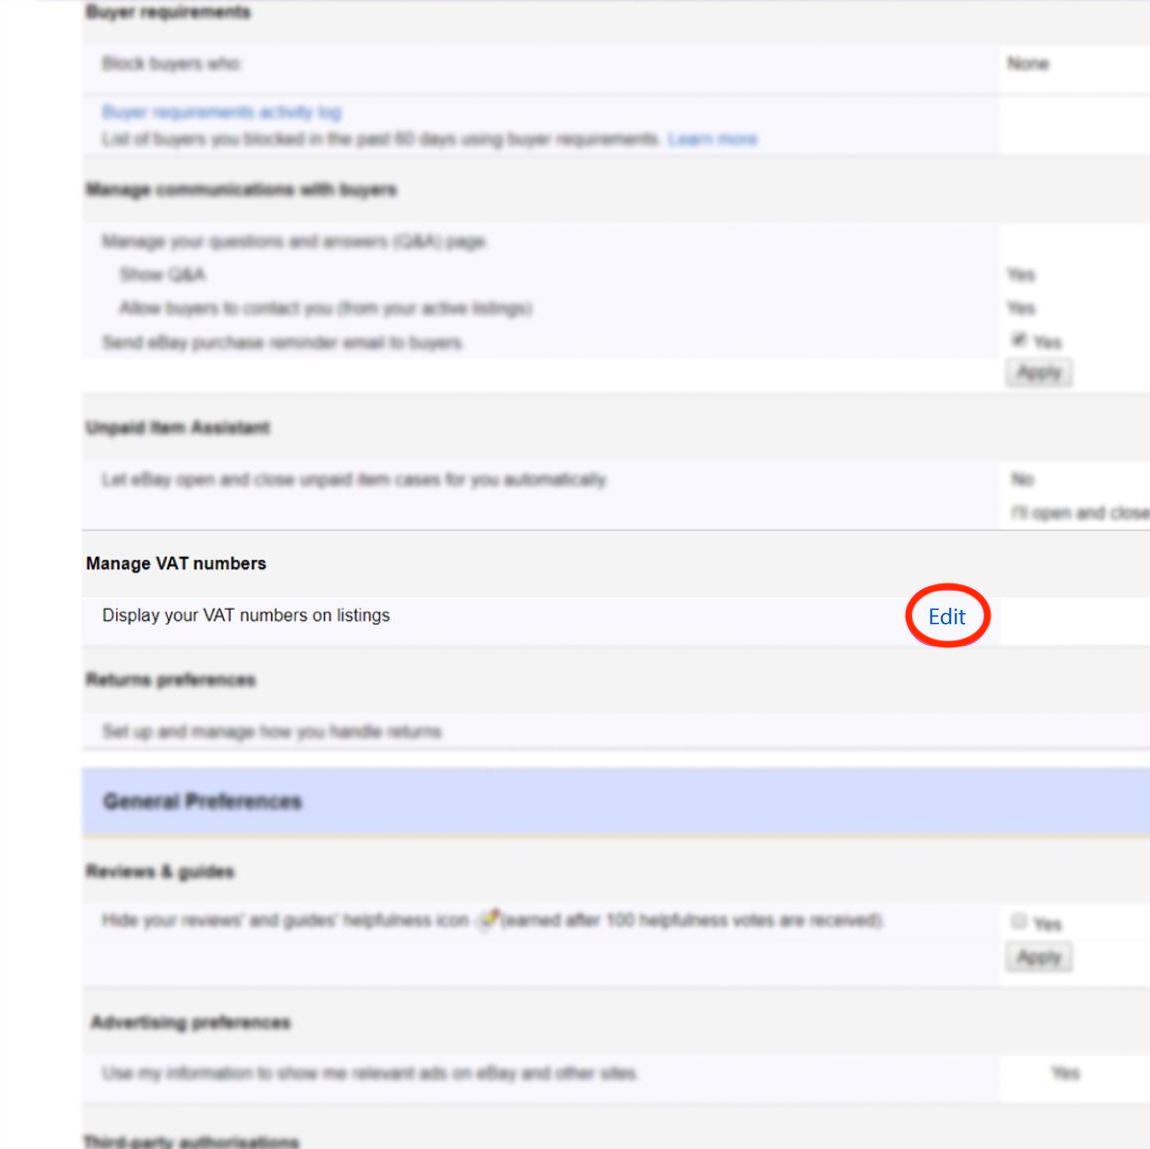 A screenshot of where to add your VAT number in the "Manage VAT numbers" section on eBay